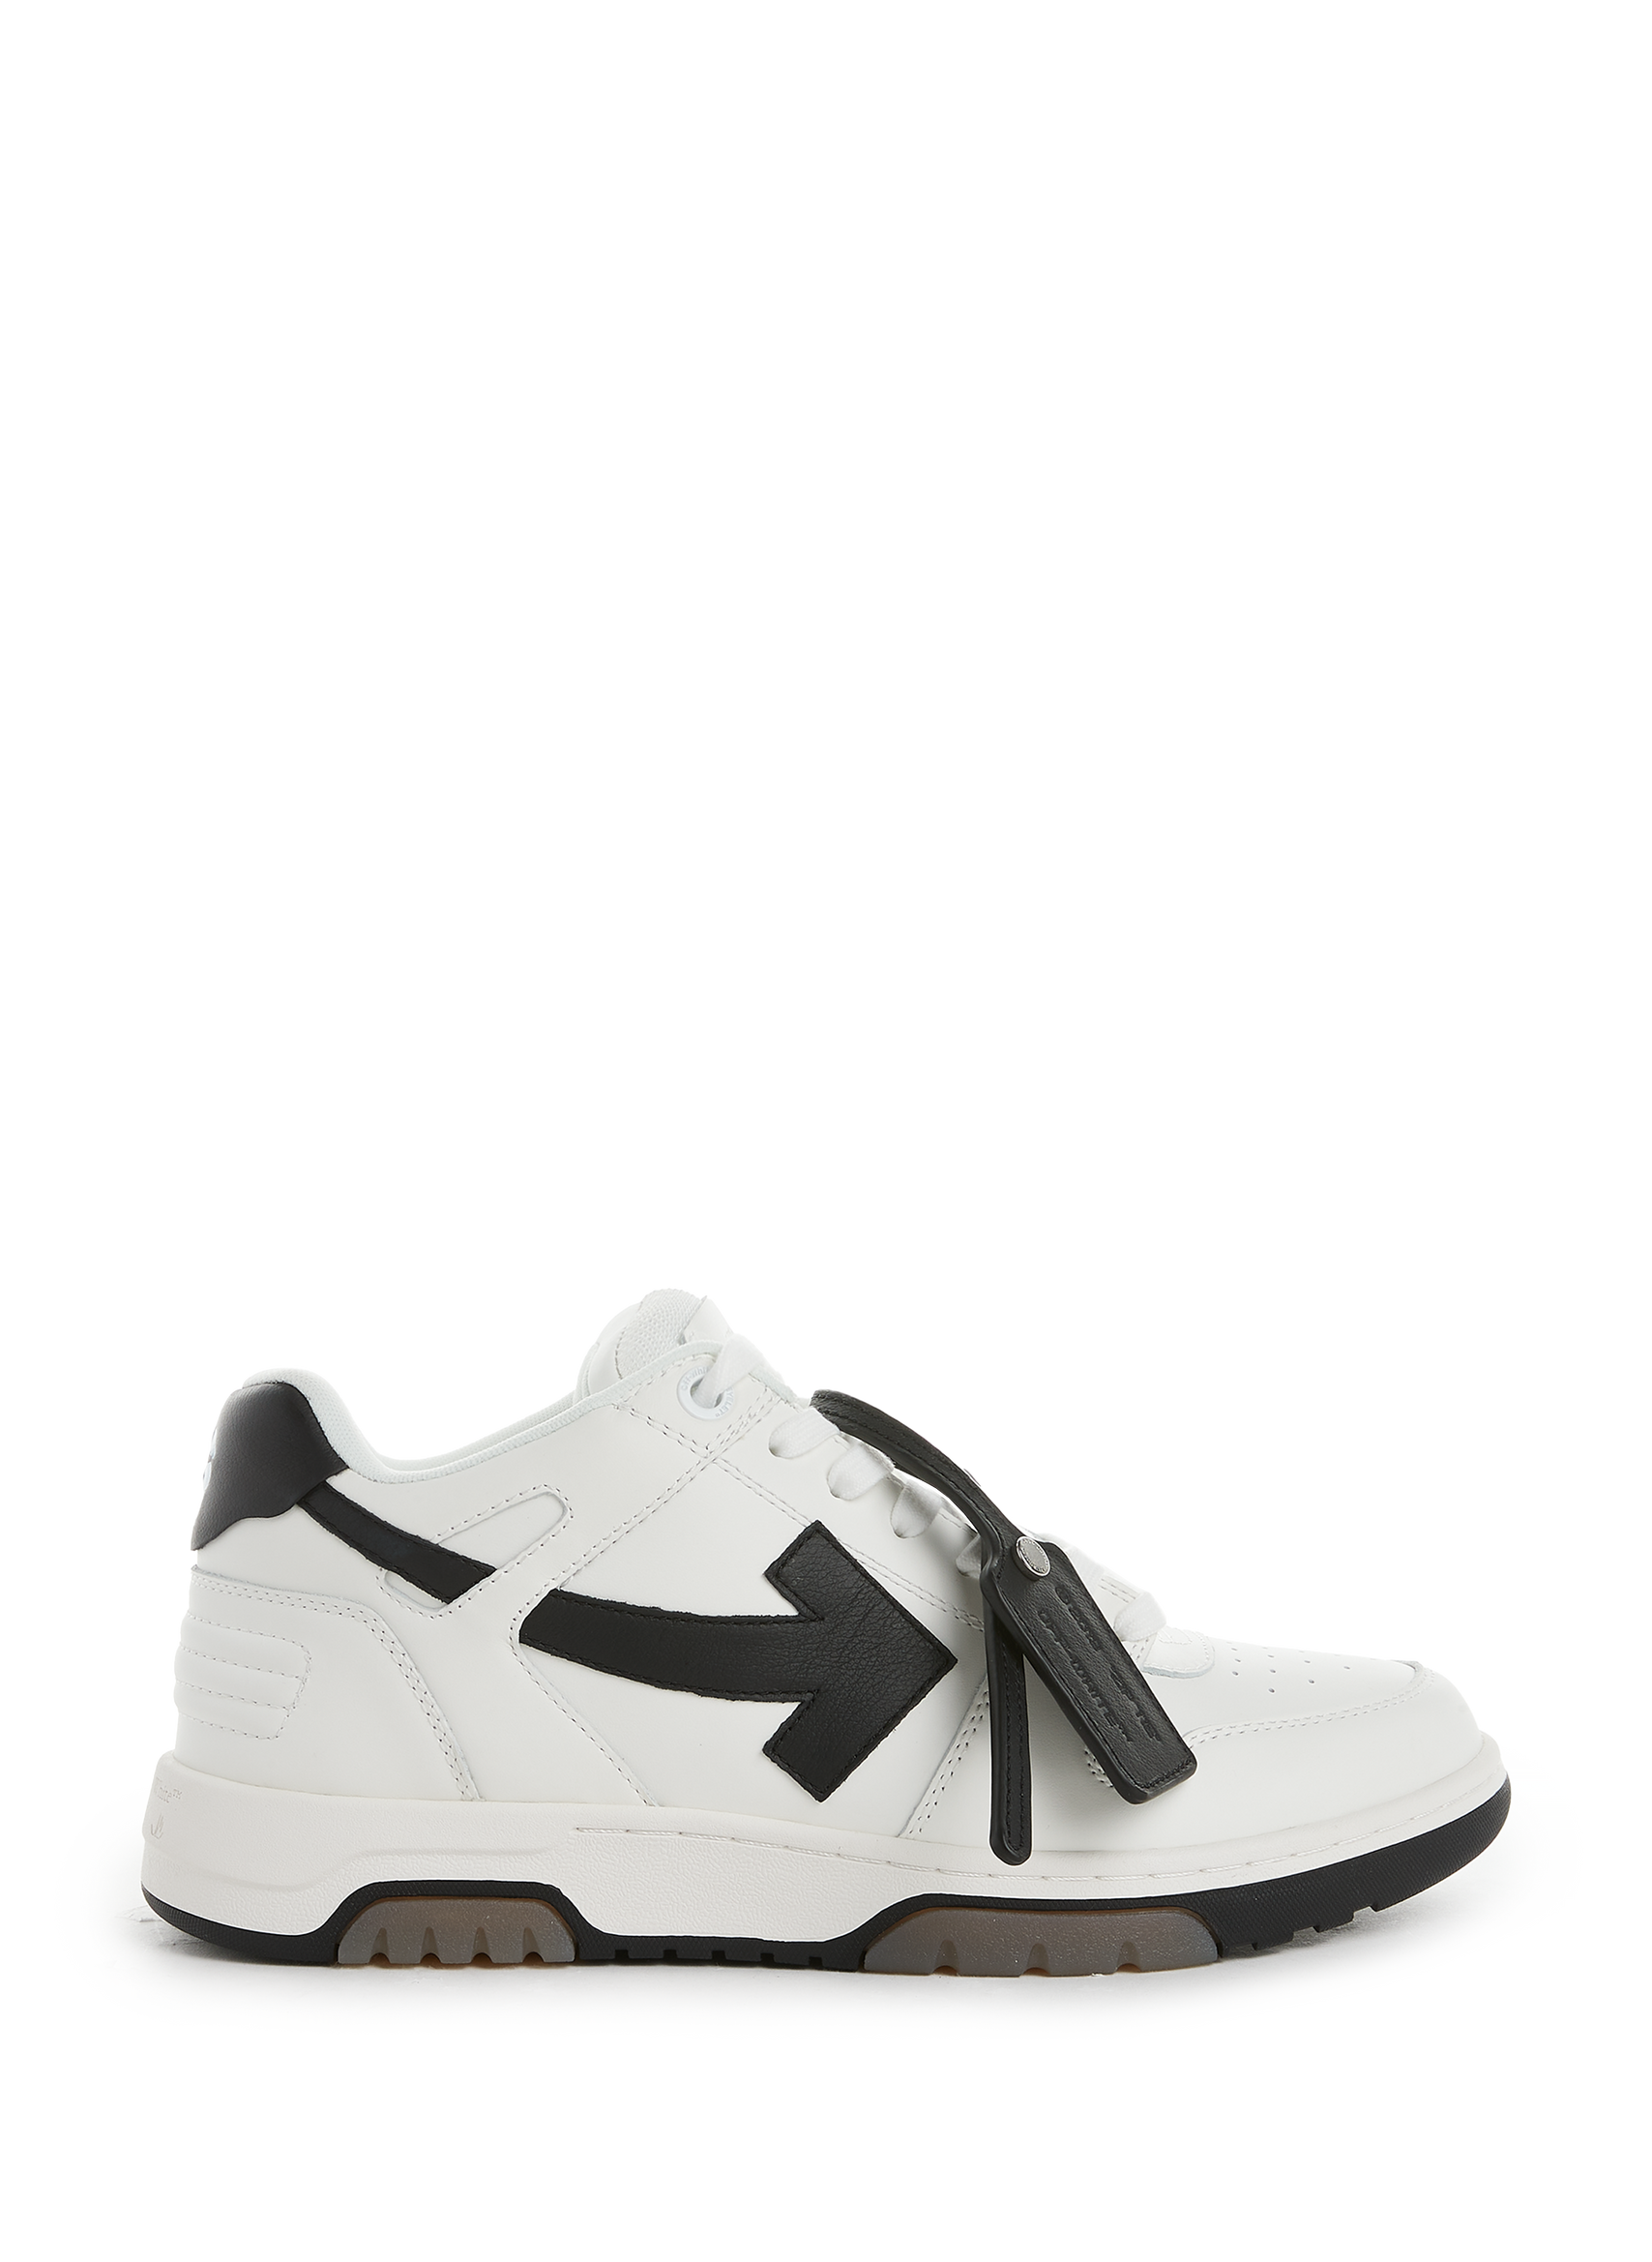 OUT OF OFFICE LEATHER SNEAKERS - OFF WHITE for MEN | Printemps.com